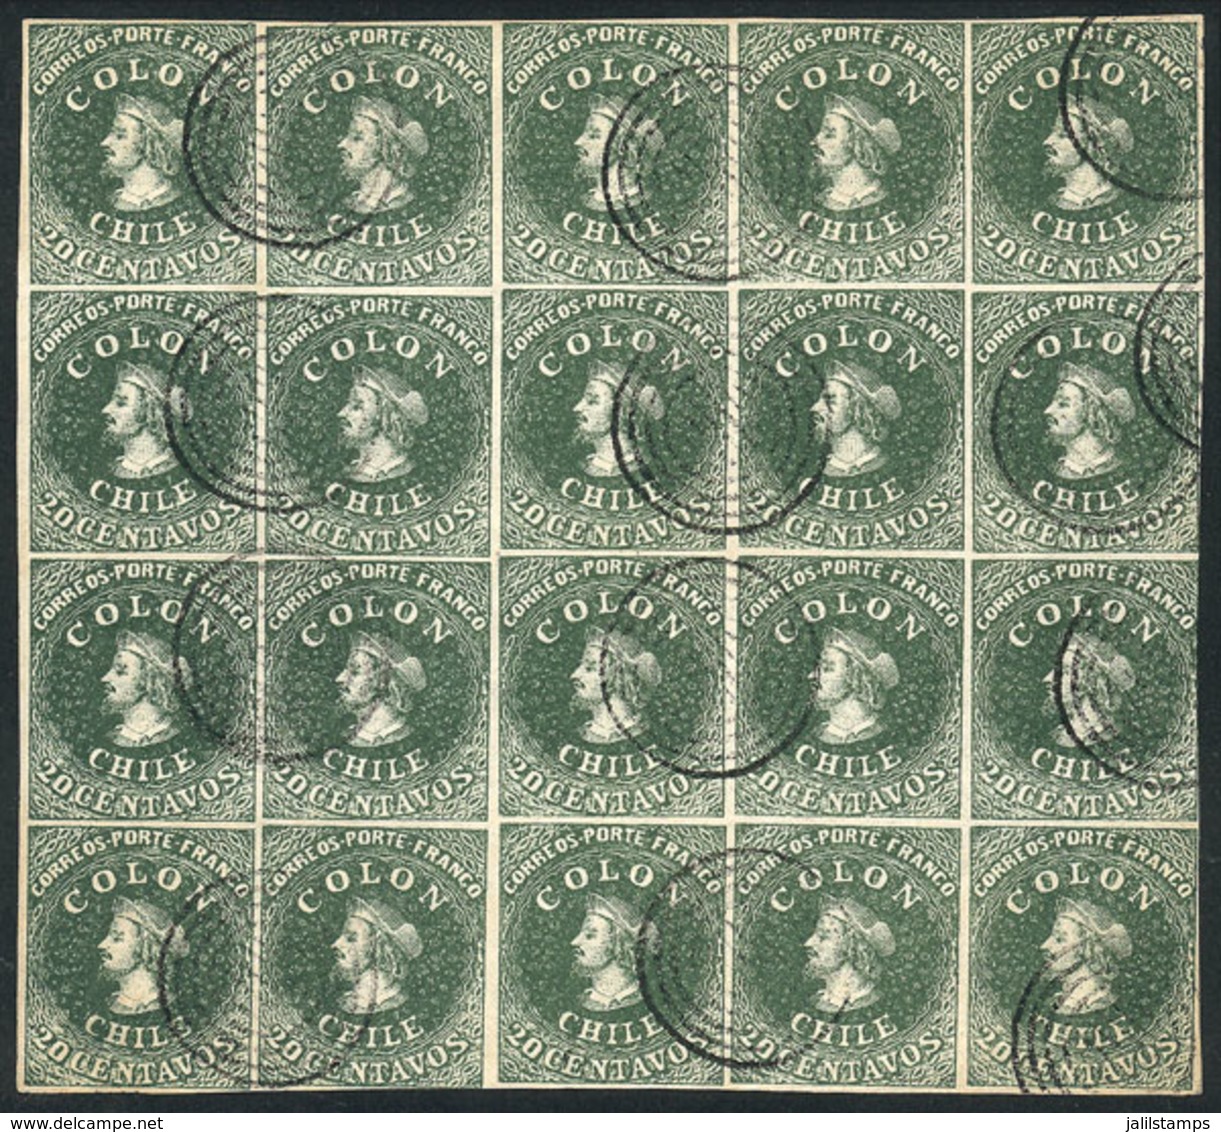 CHILE: GJ.13, 1862 20c. Green, Unwatermarked REPRINT, Beautiful Block Of 20 Stamps, Excellent Quality! - Chile